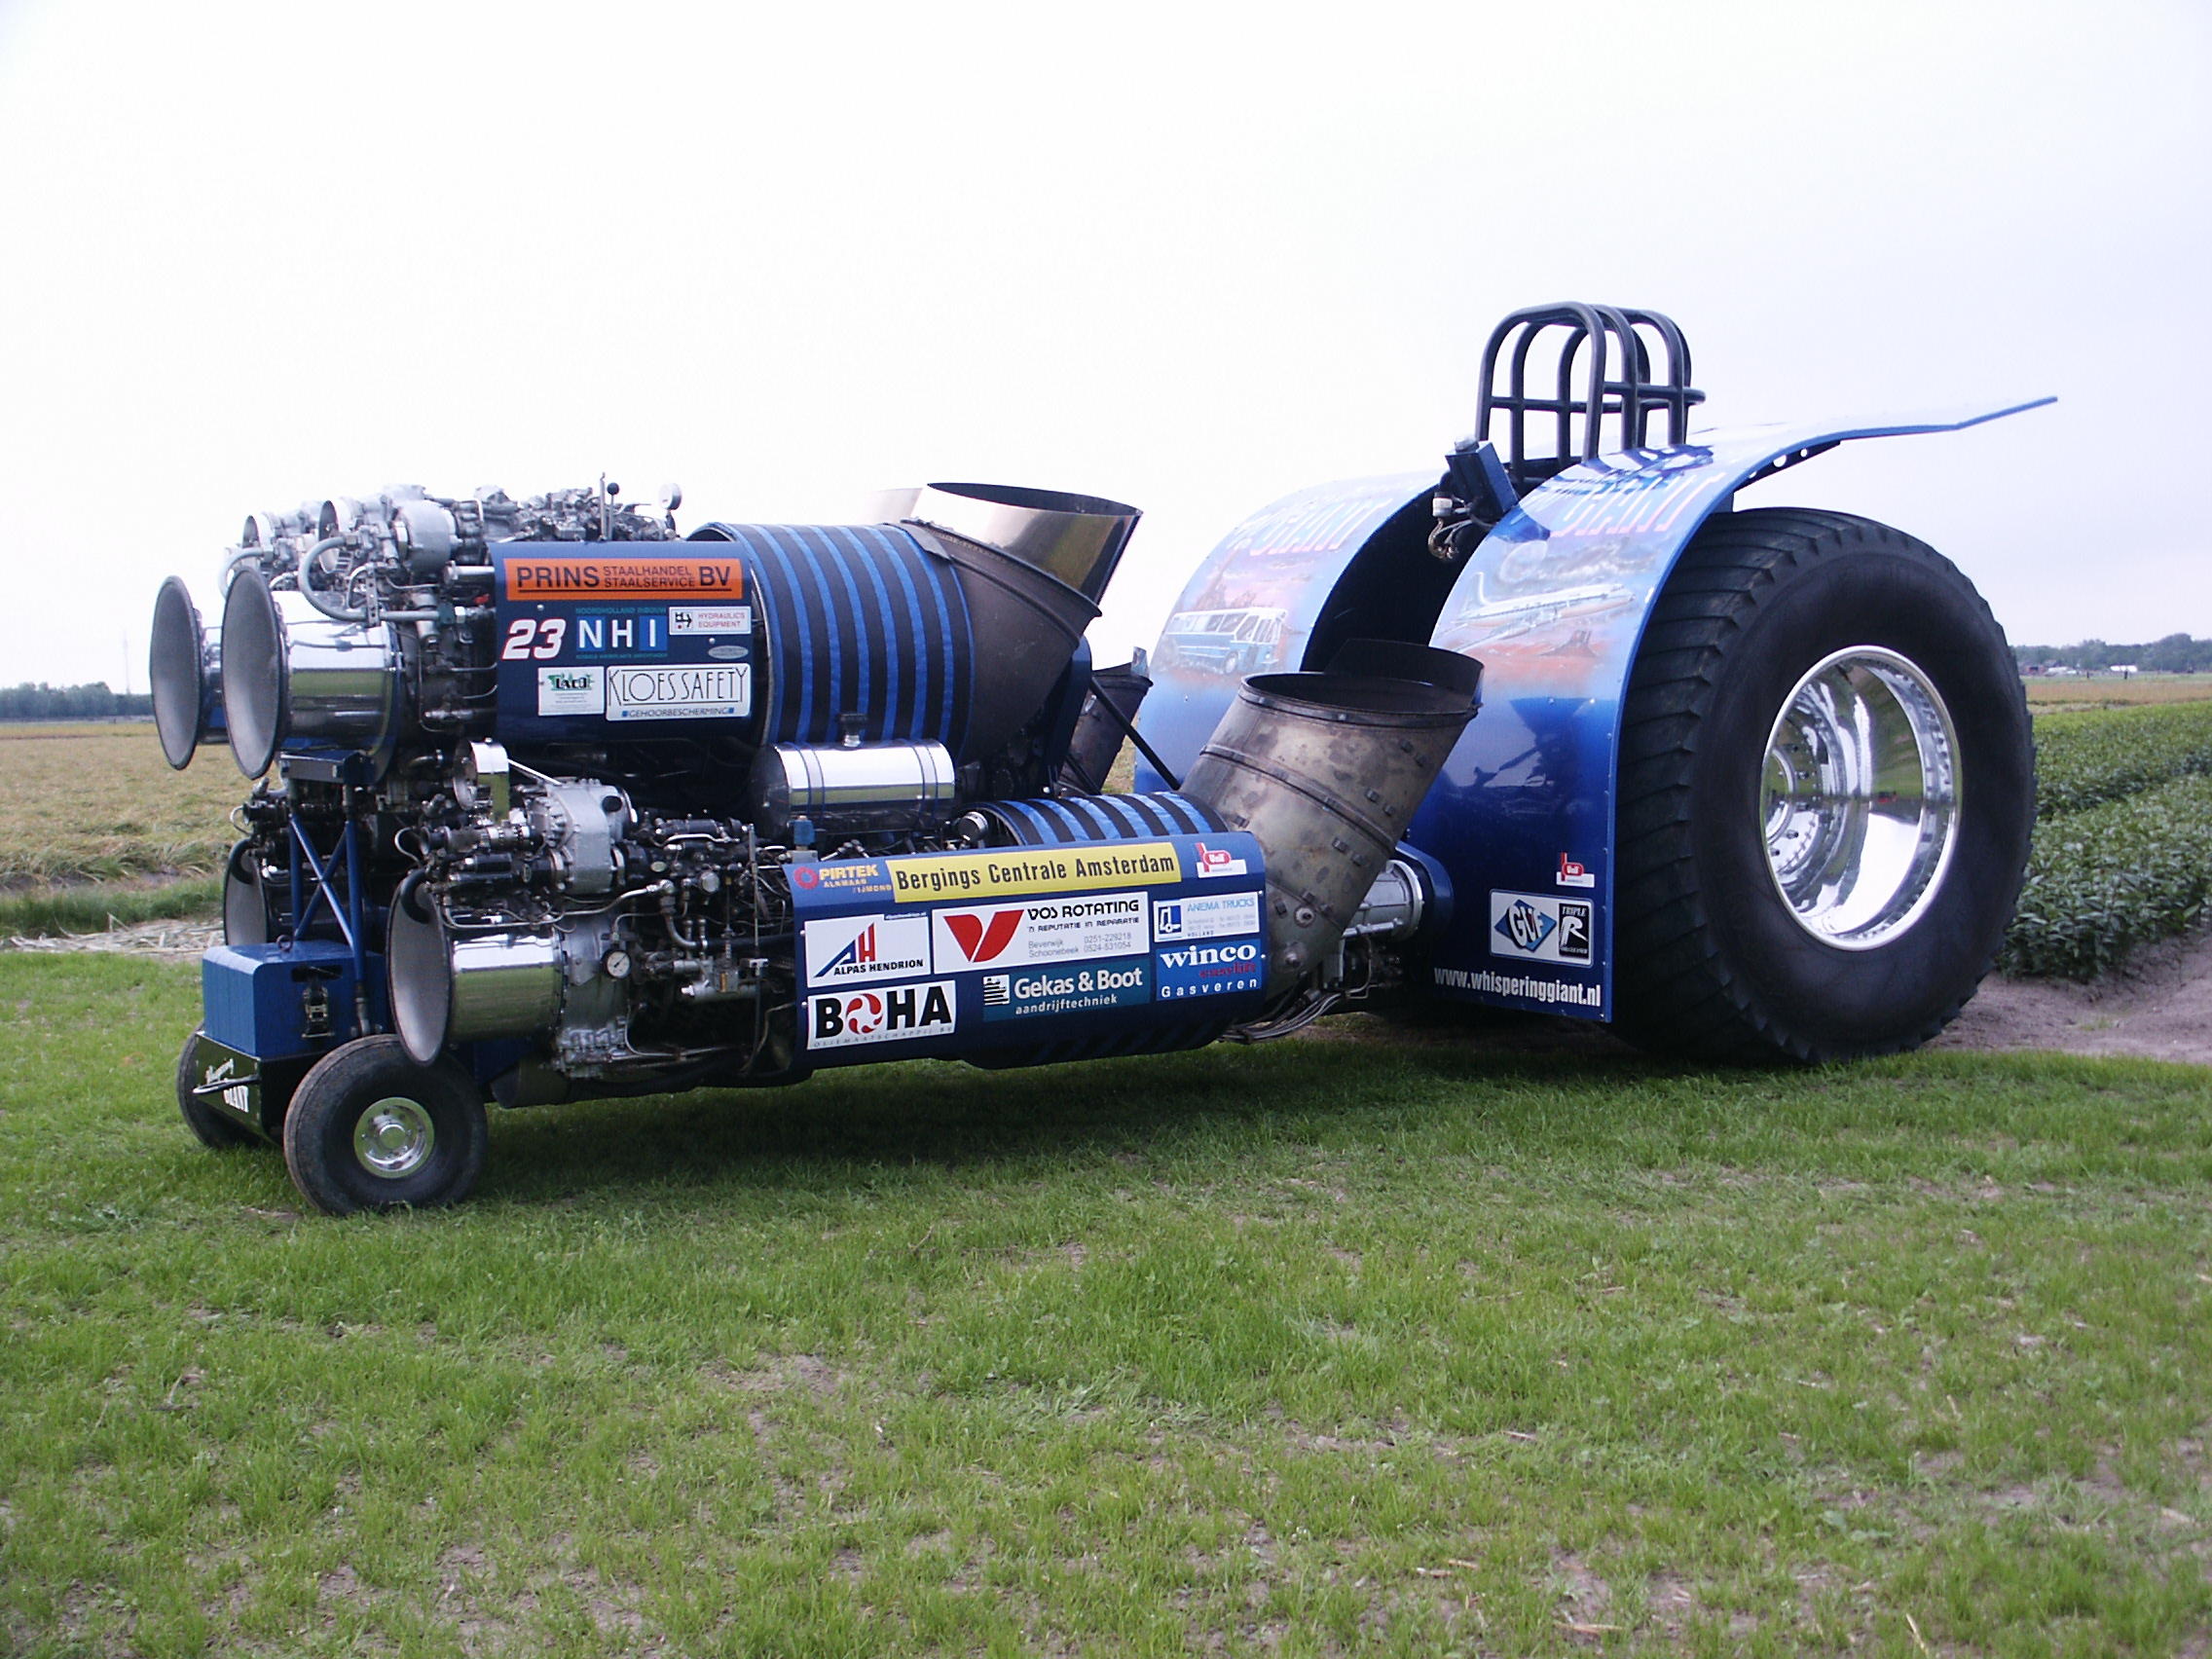 tractor pulling, Race, Racing, Hot, Rod, Rods, Tractor, Engine, Jet Wallpaper